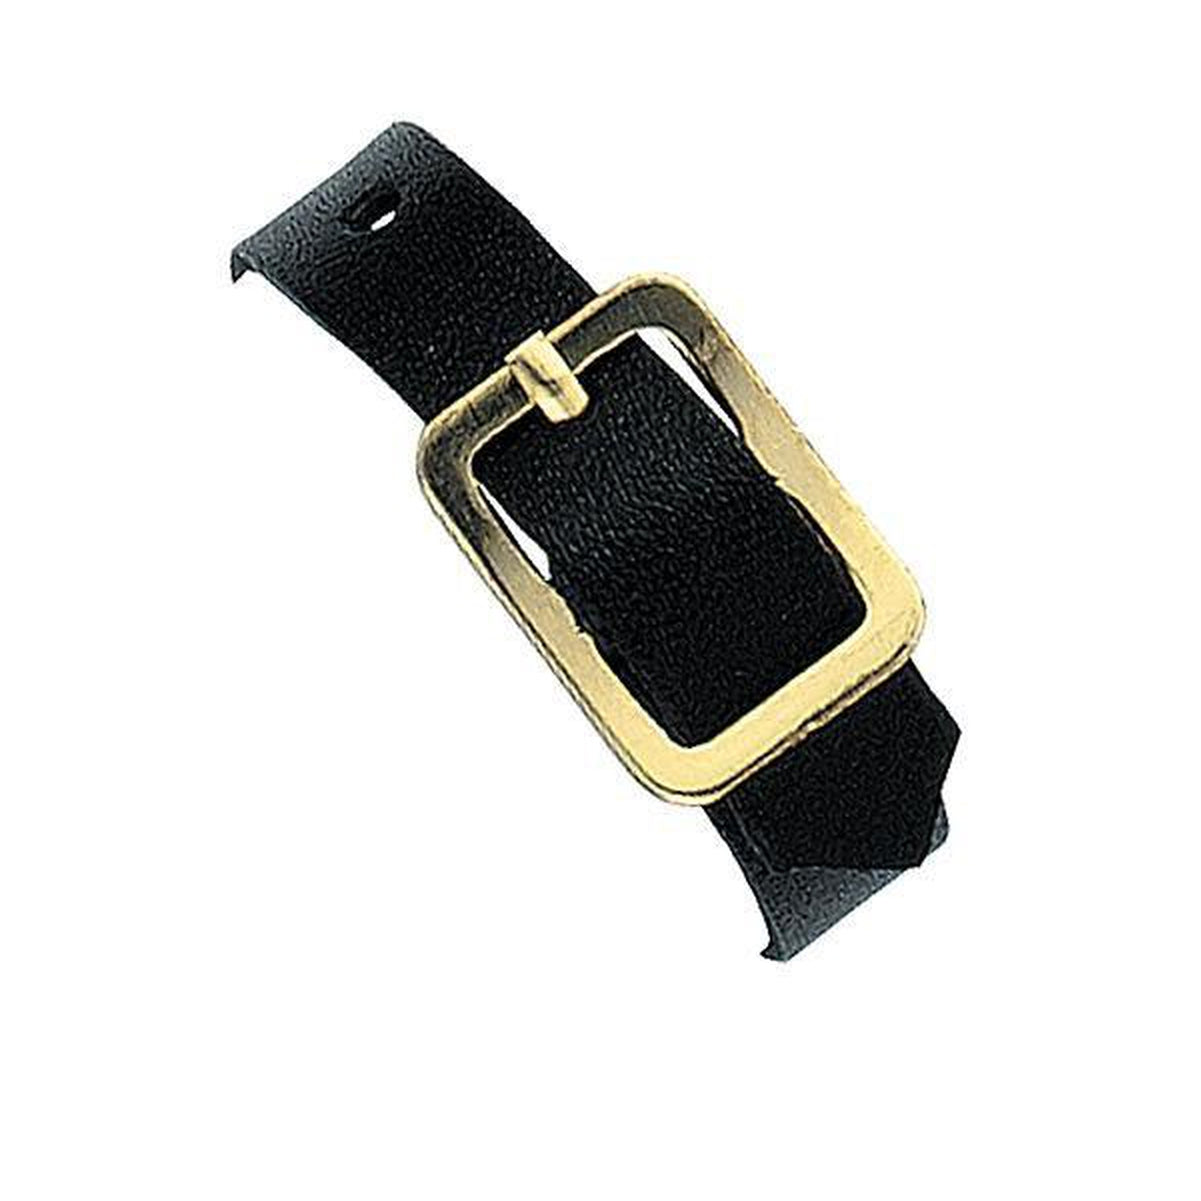 Black Genuine Leather Luggage Strap W/ Brass-Plated Buckle, 3 Holes  2420-1041